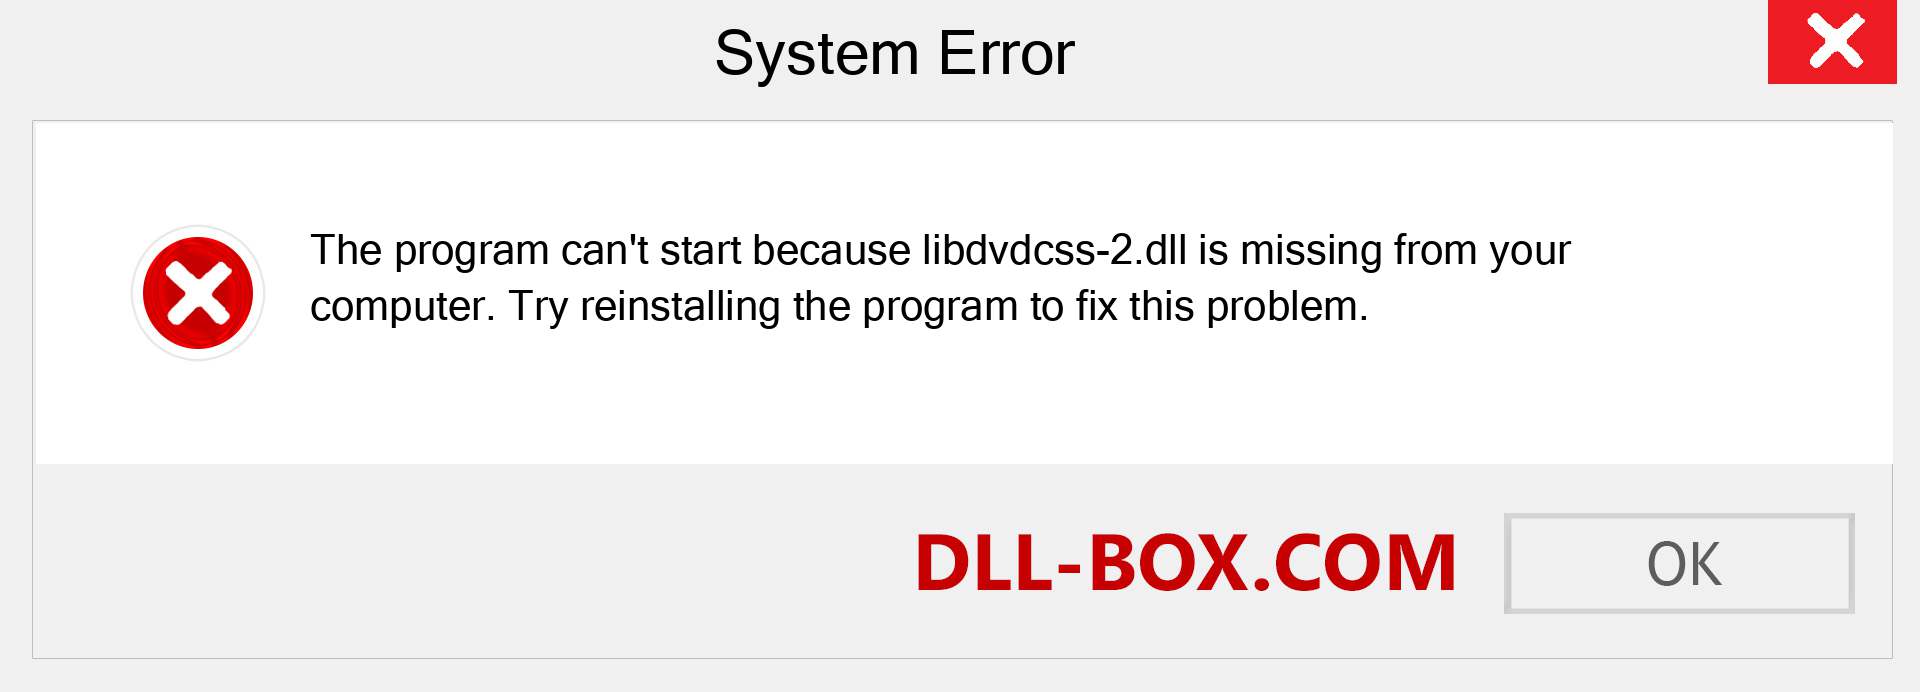  libdvdcss-2.dll file is missing?. Download for Windows 7, 8, 10 - Fix  libdvdcss-2 dll Missing Error on Windows, photos, images